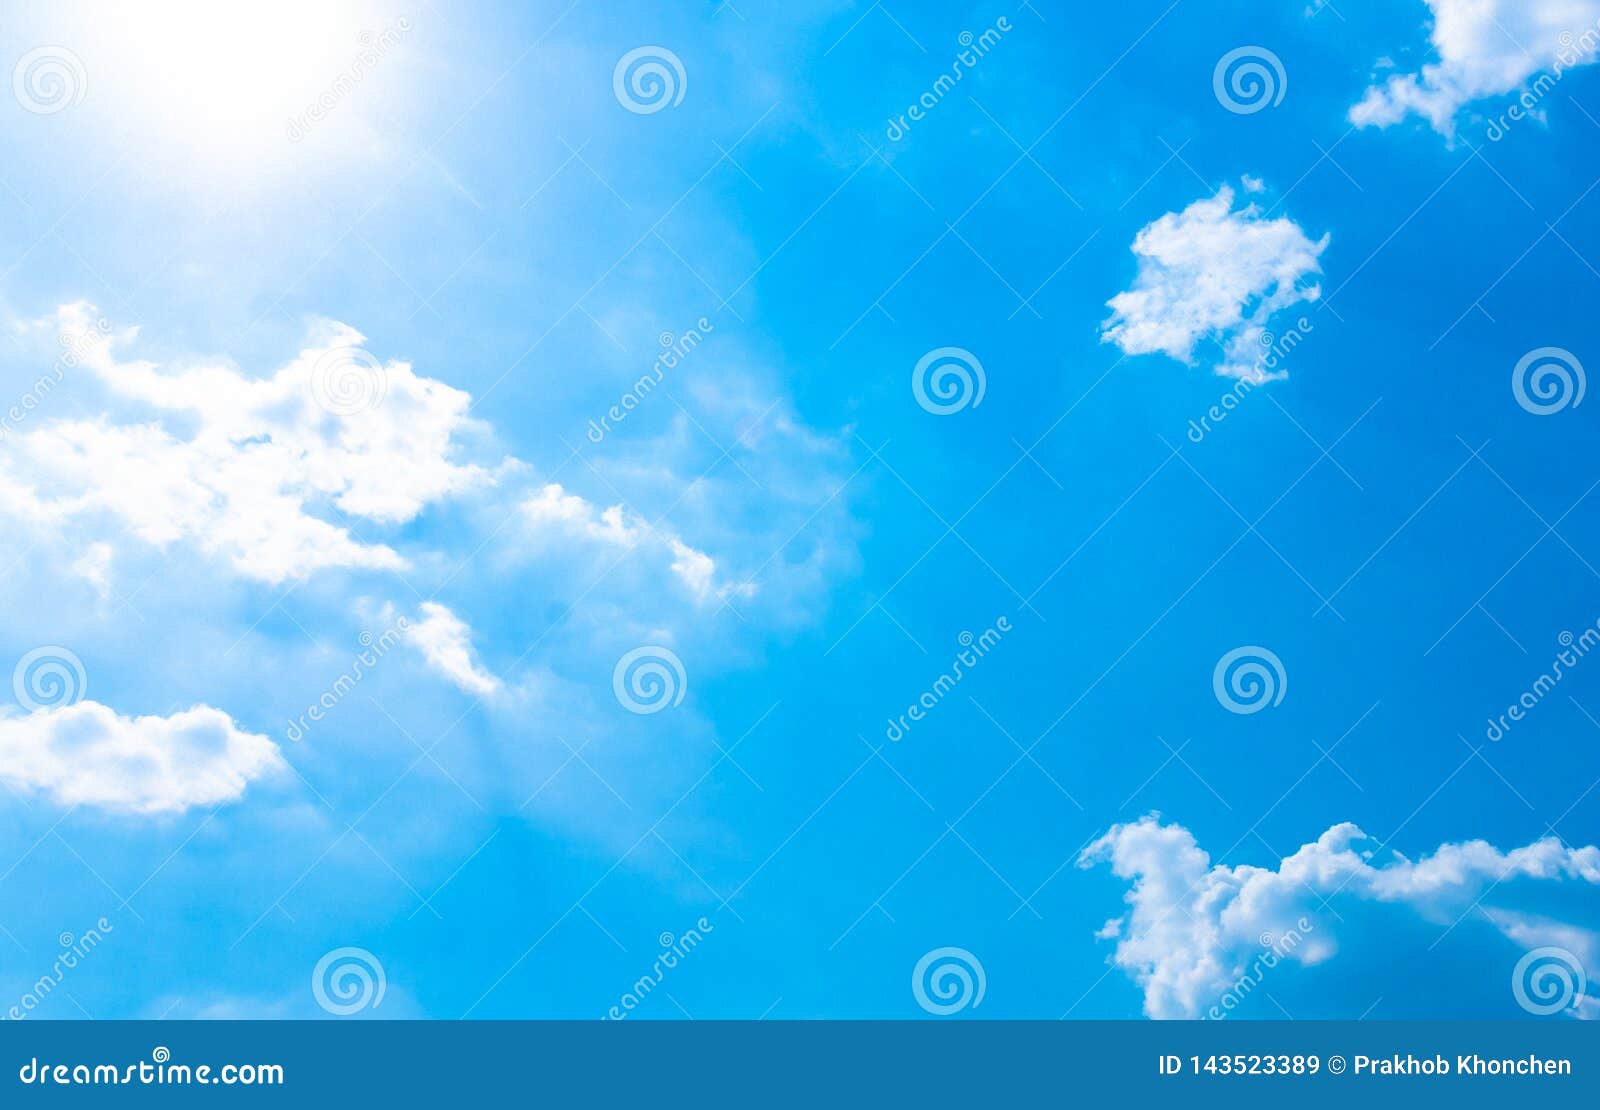 Blue Sky Background with Clouds Stock Image - Image of cloud, daylight ...